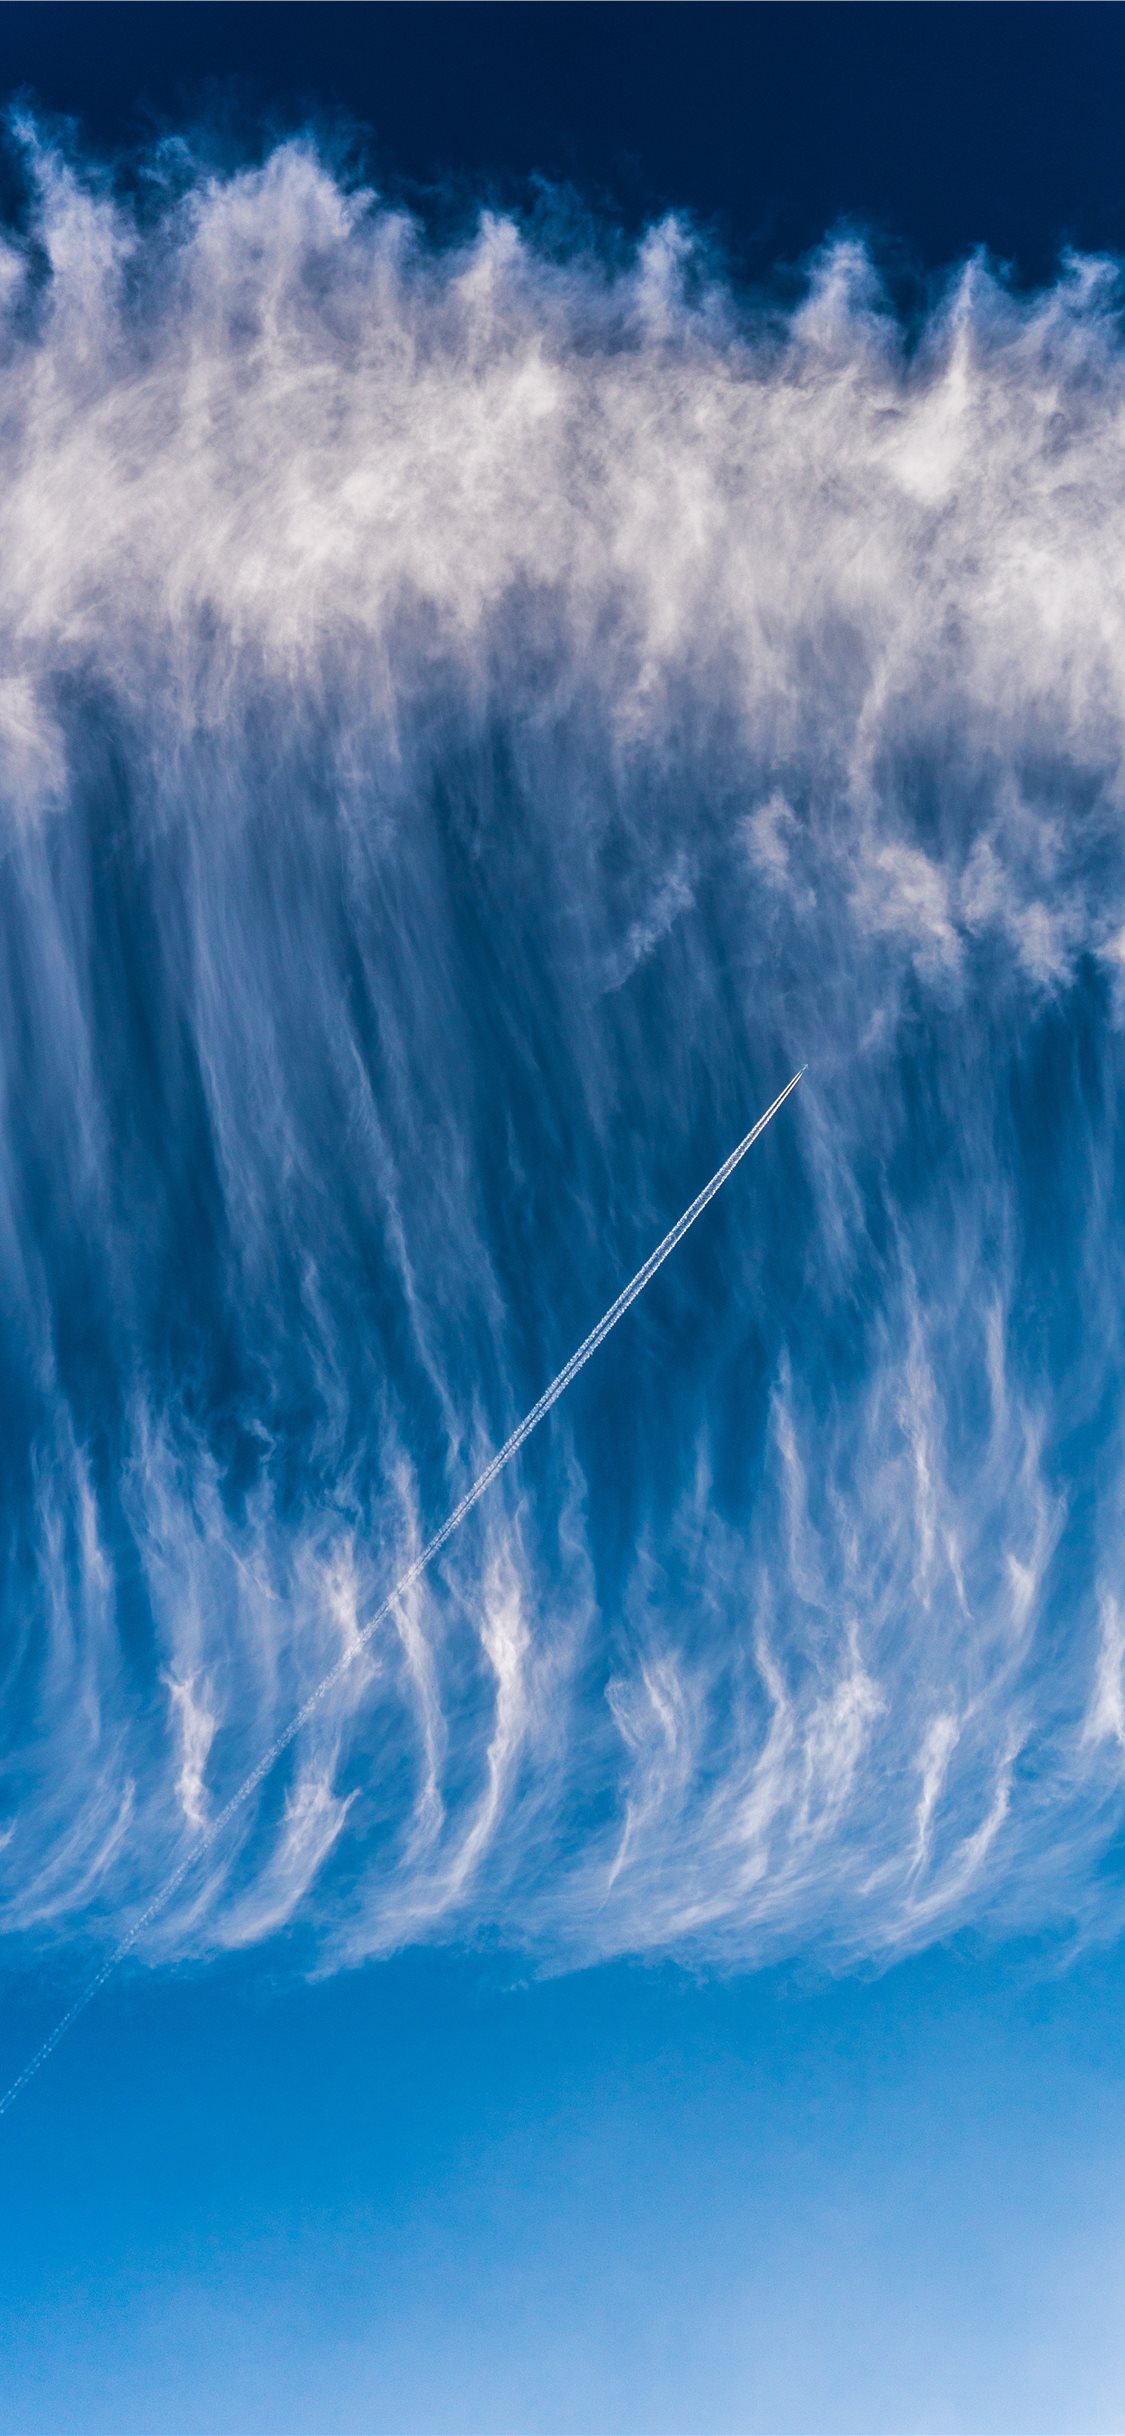 Sky Surfing Airplane Skytrail Contrail In A Wa Iphone X